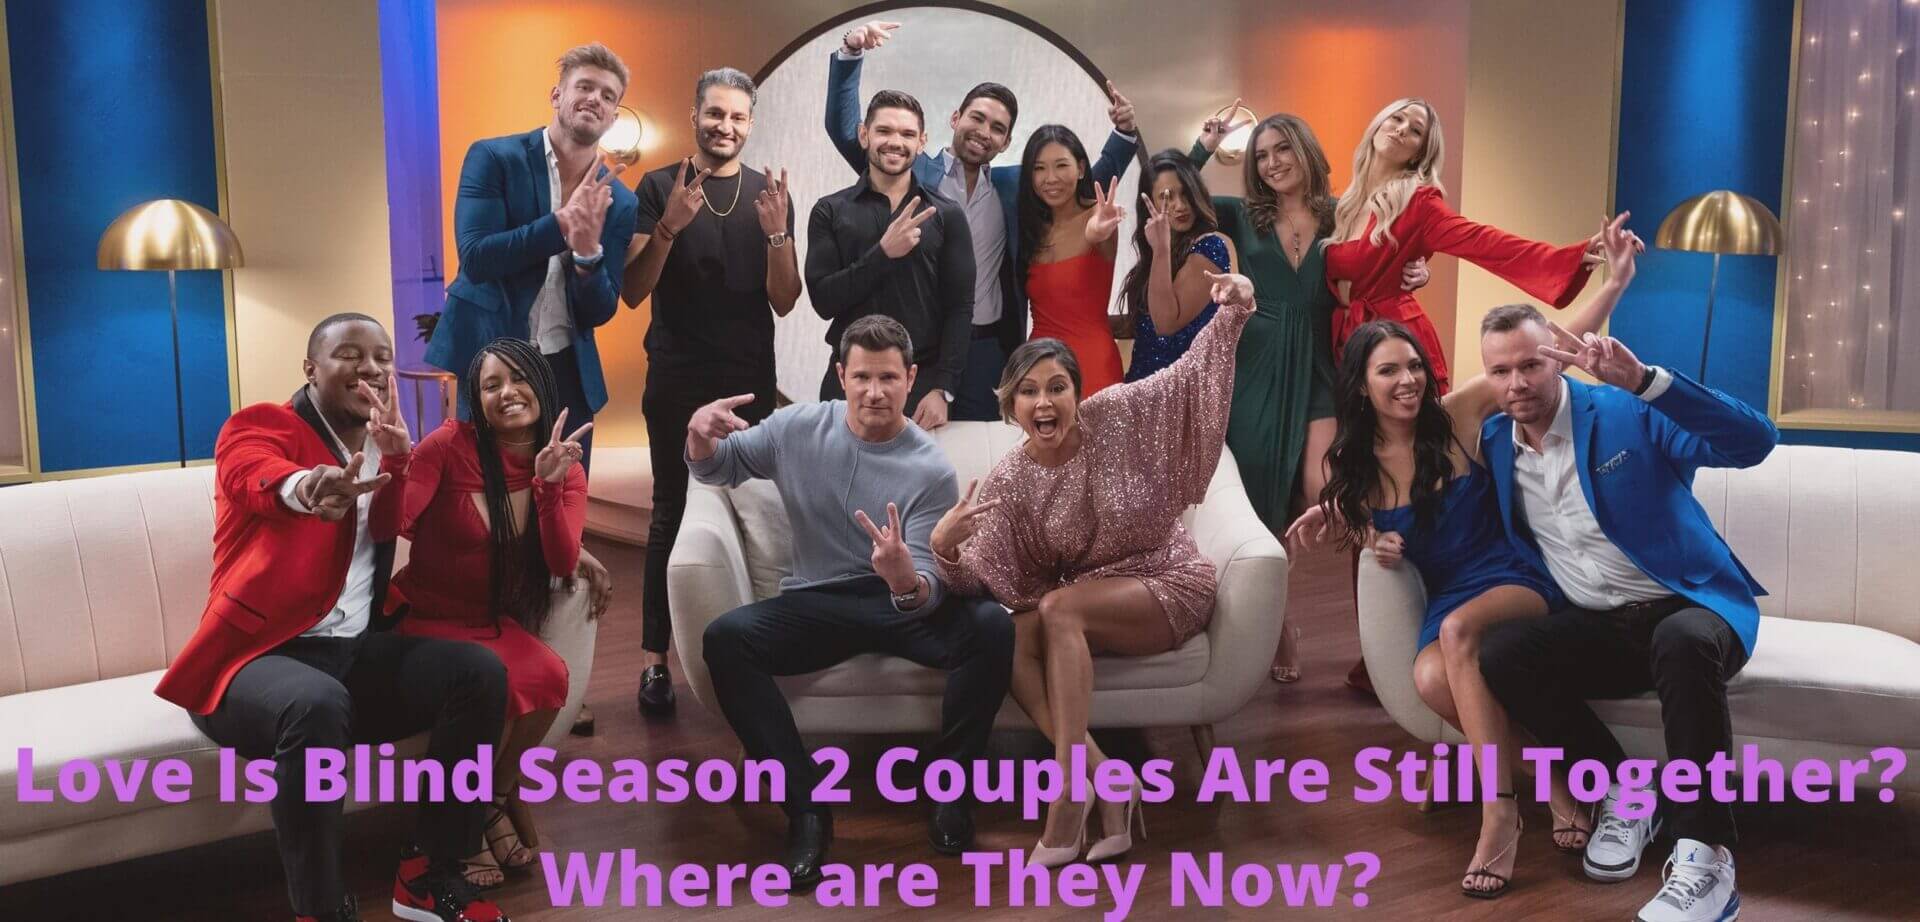 Love Is Blind Season 2 Couples Are Still Together? Where are They Now